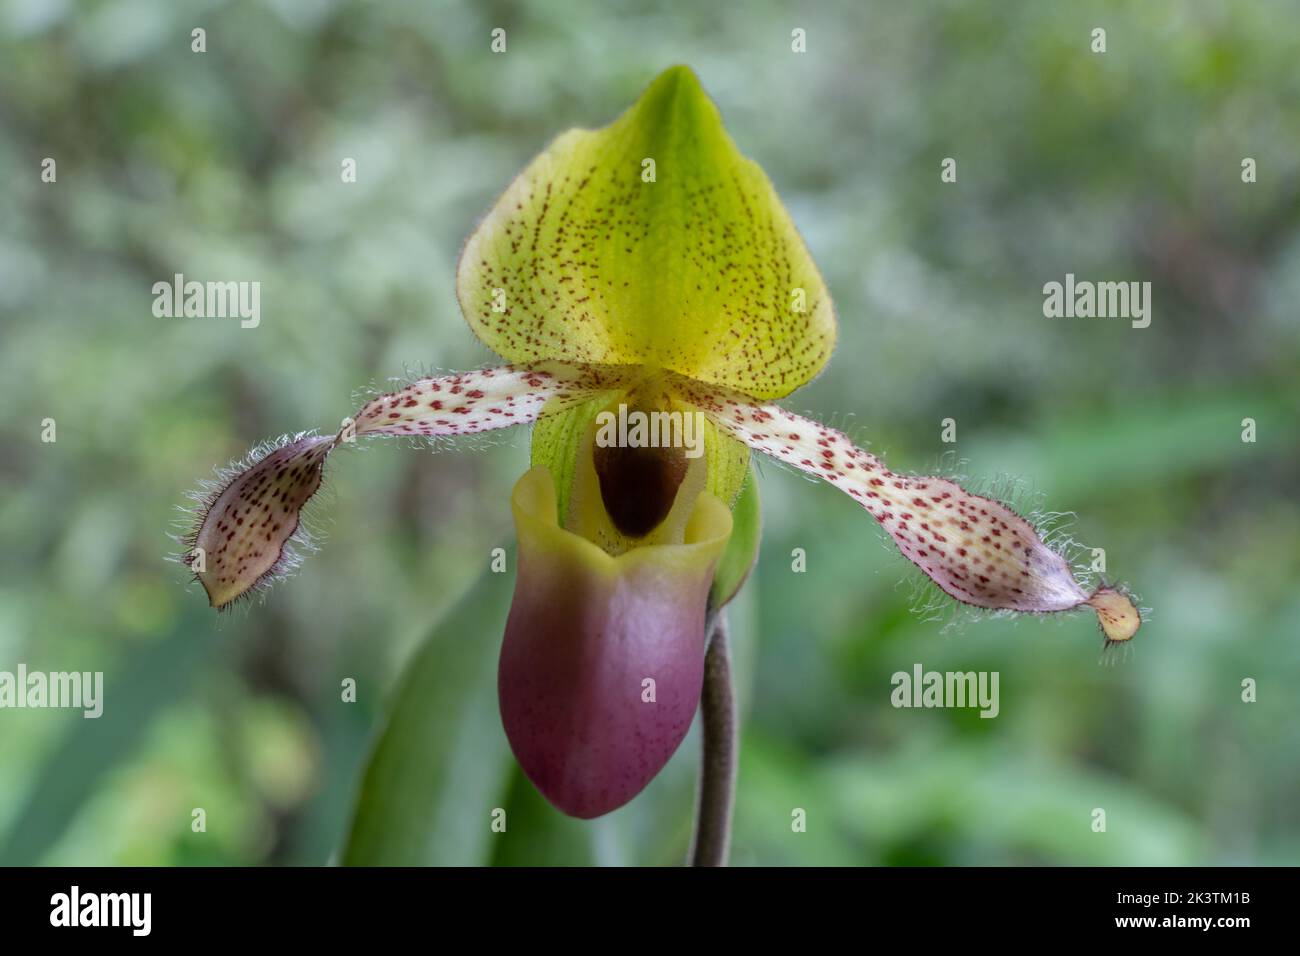 Closeup view of colorful yellow green and purple lady slipper orchid paphiopedilum moquetteanum (species) flower isolated on natural background Stock Photo